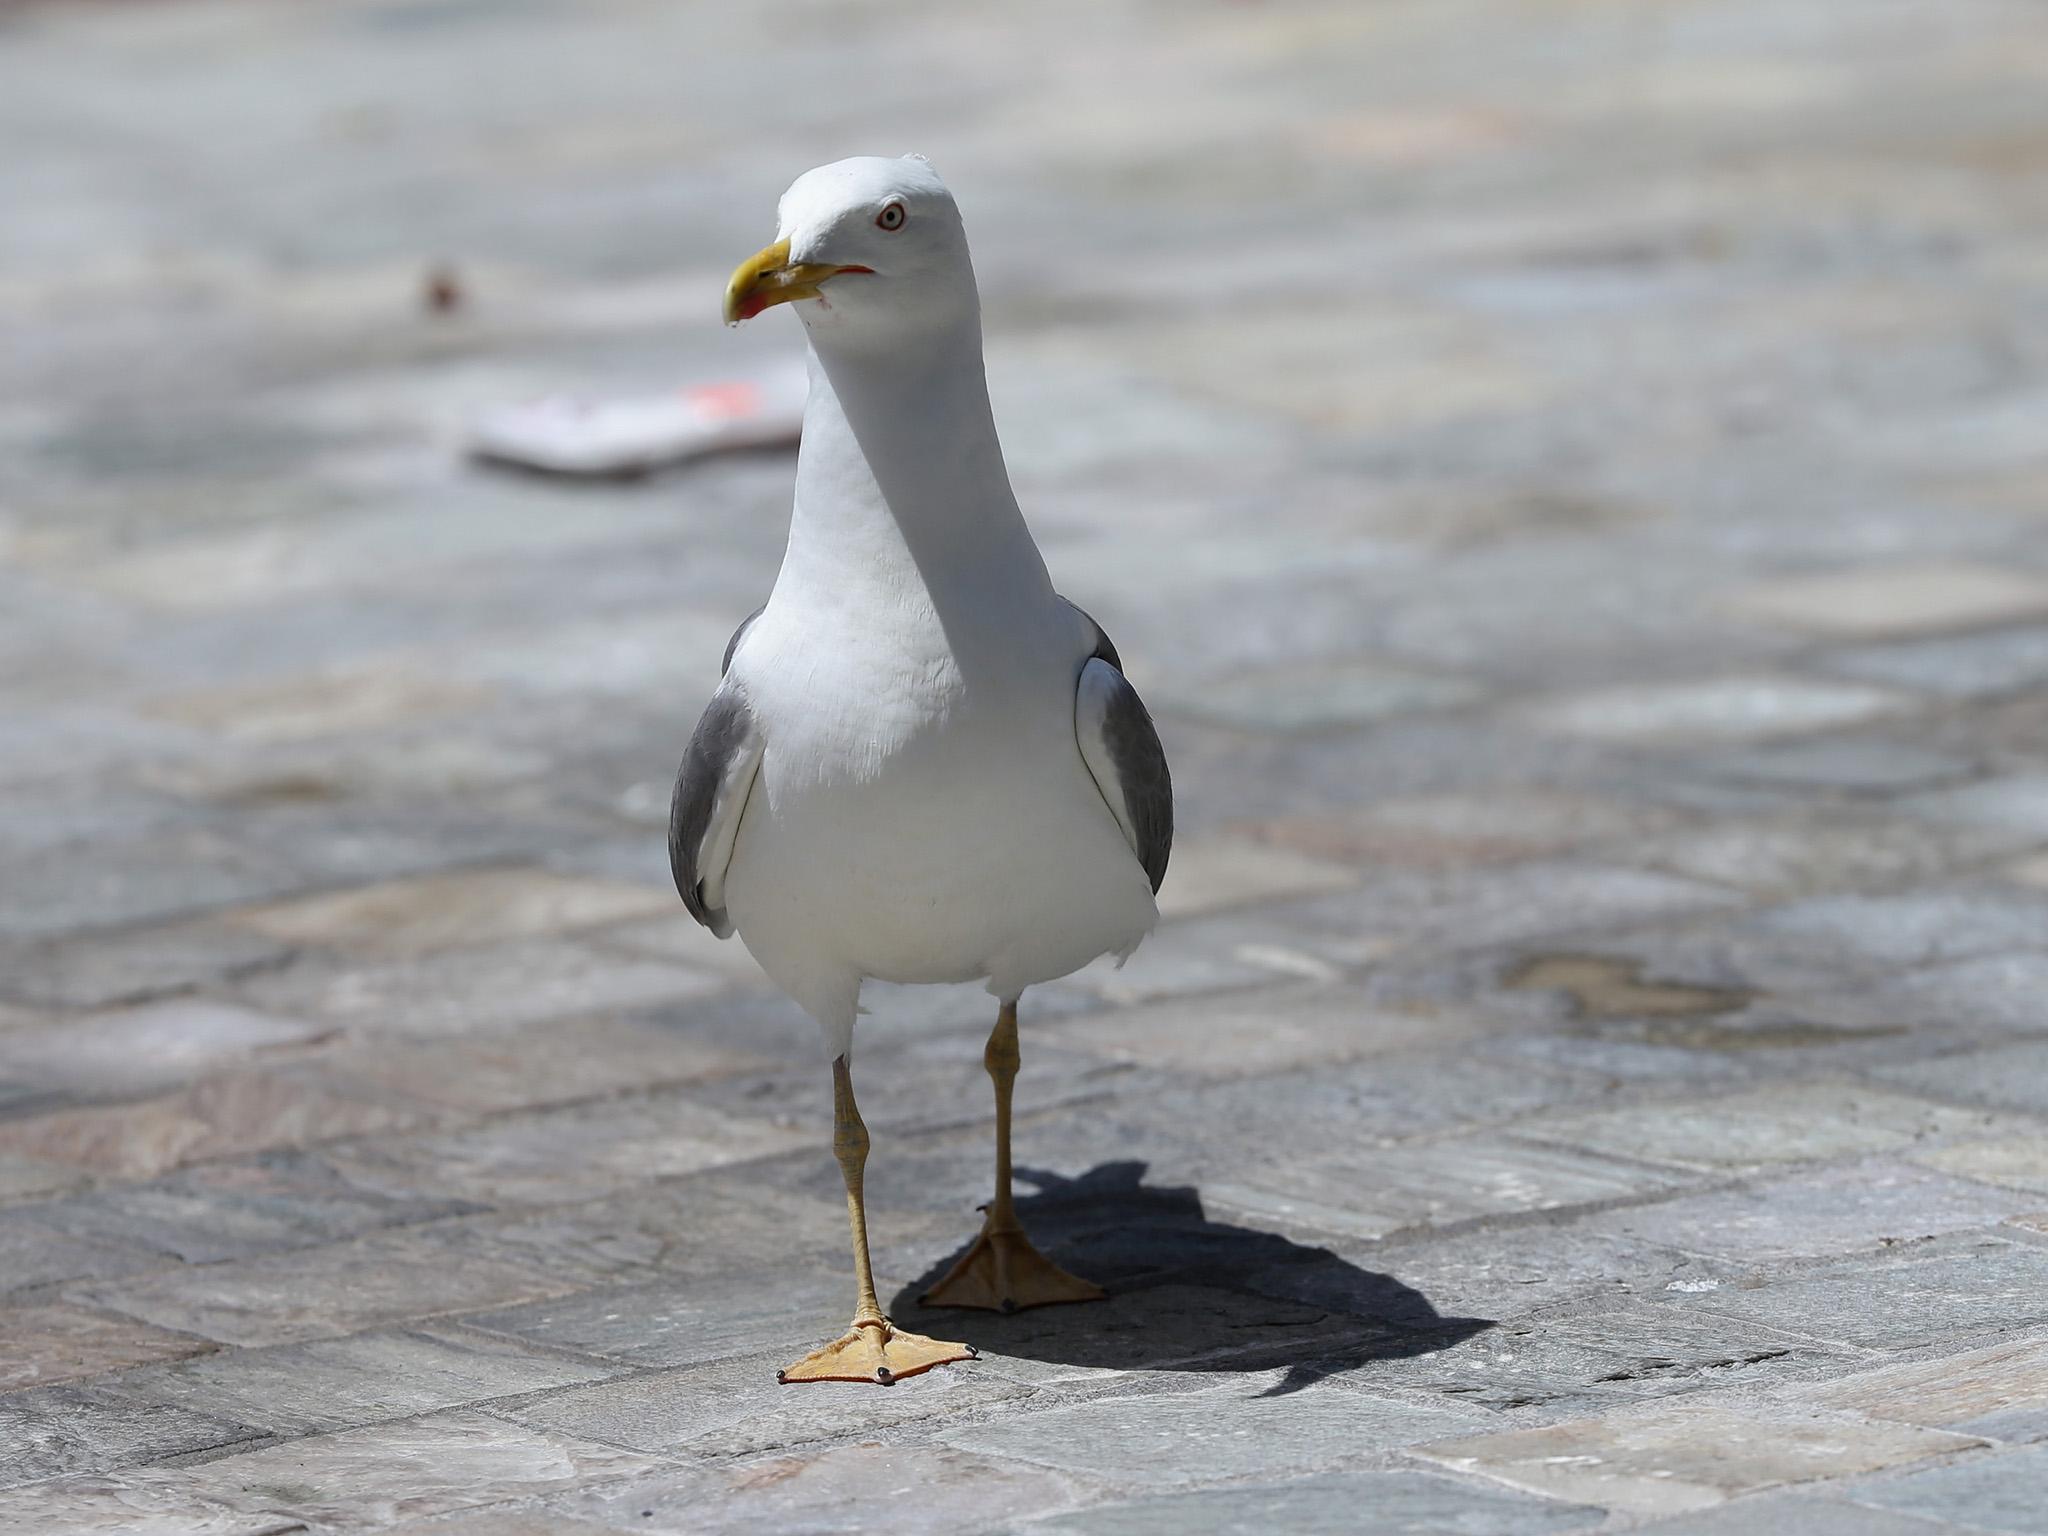 Woman Who Took Seagull For Walk On Lead Handed One Year